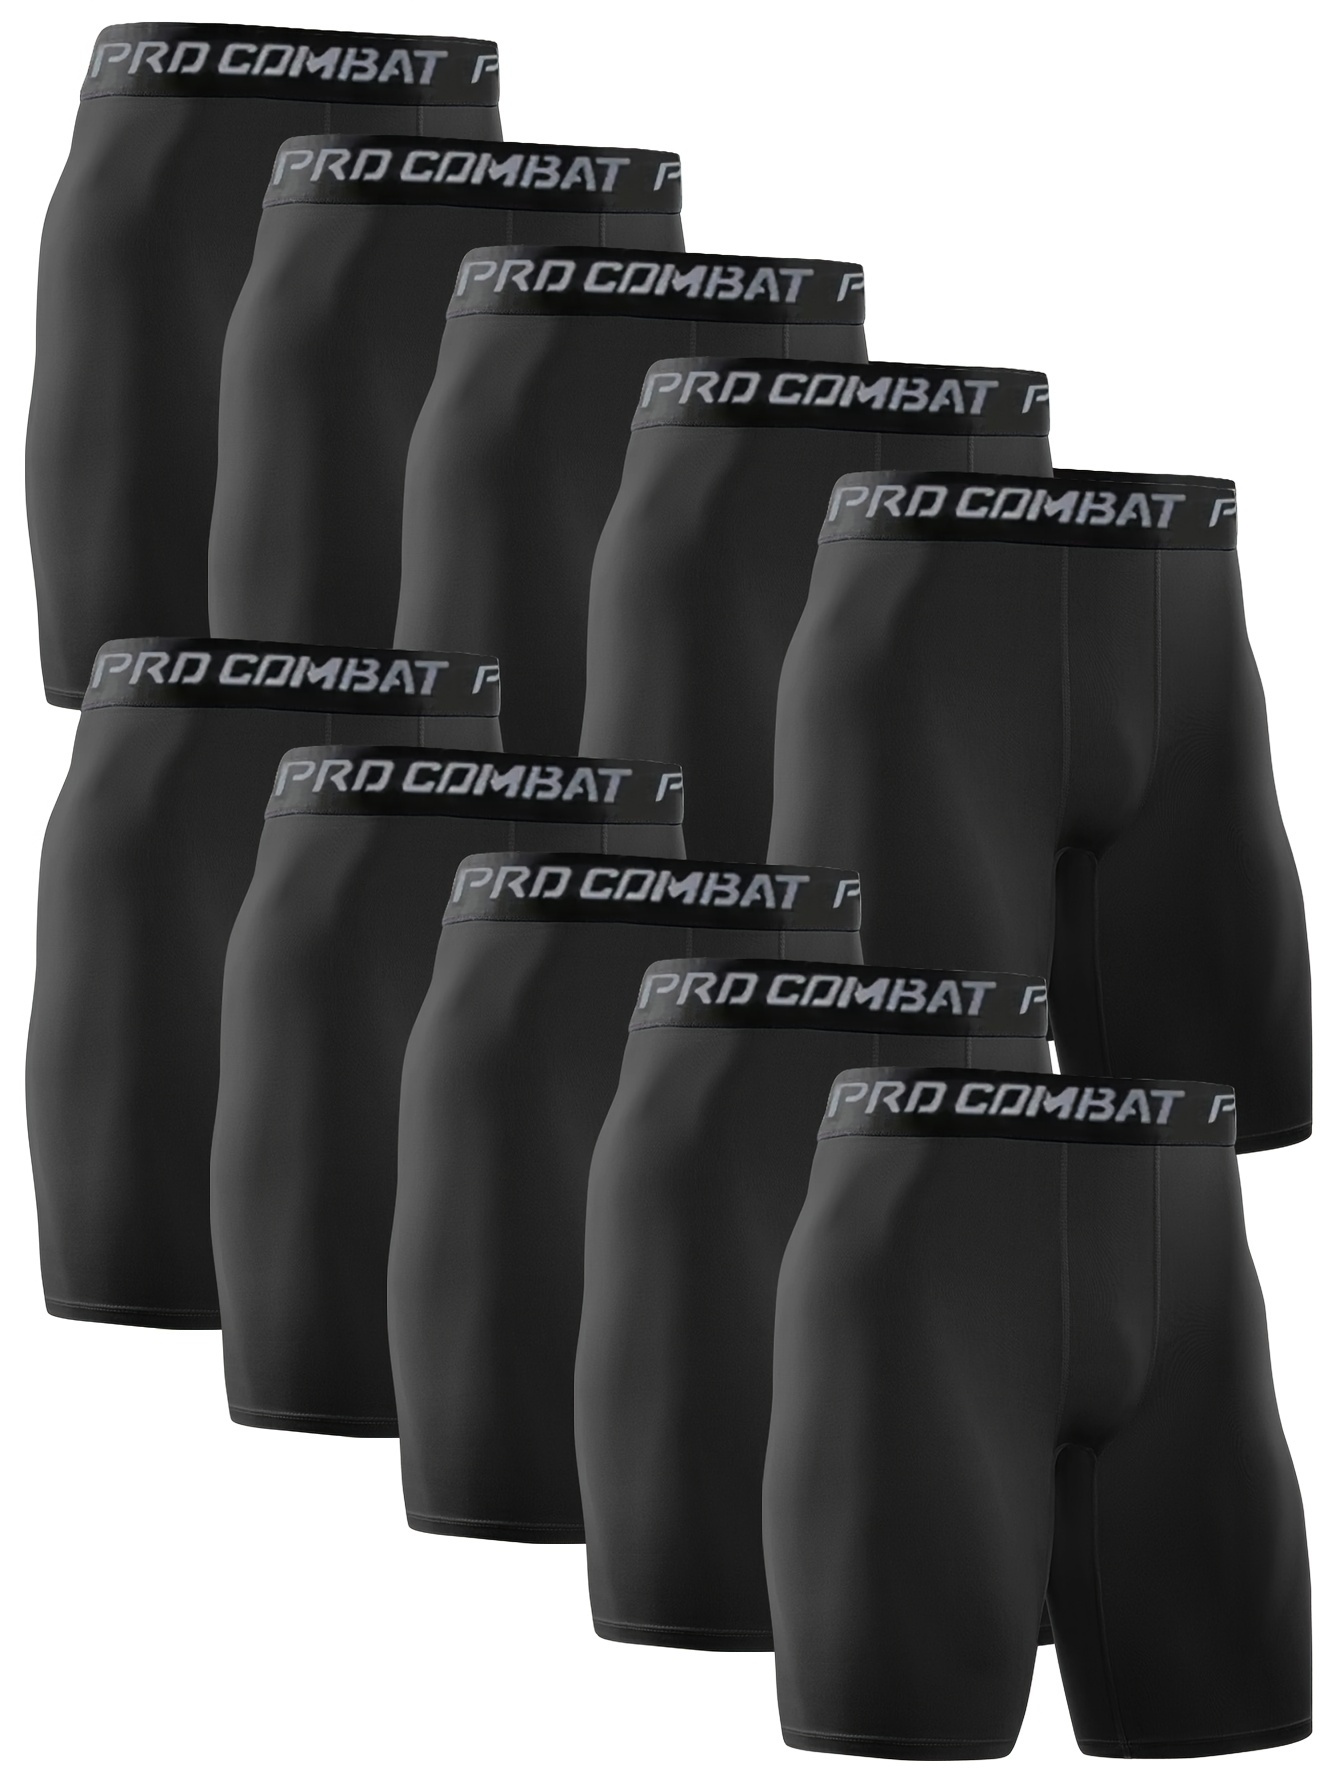 Mens Pro Combat Compression Shorts Quick Dry, Breathable Sports